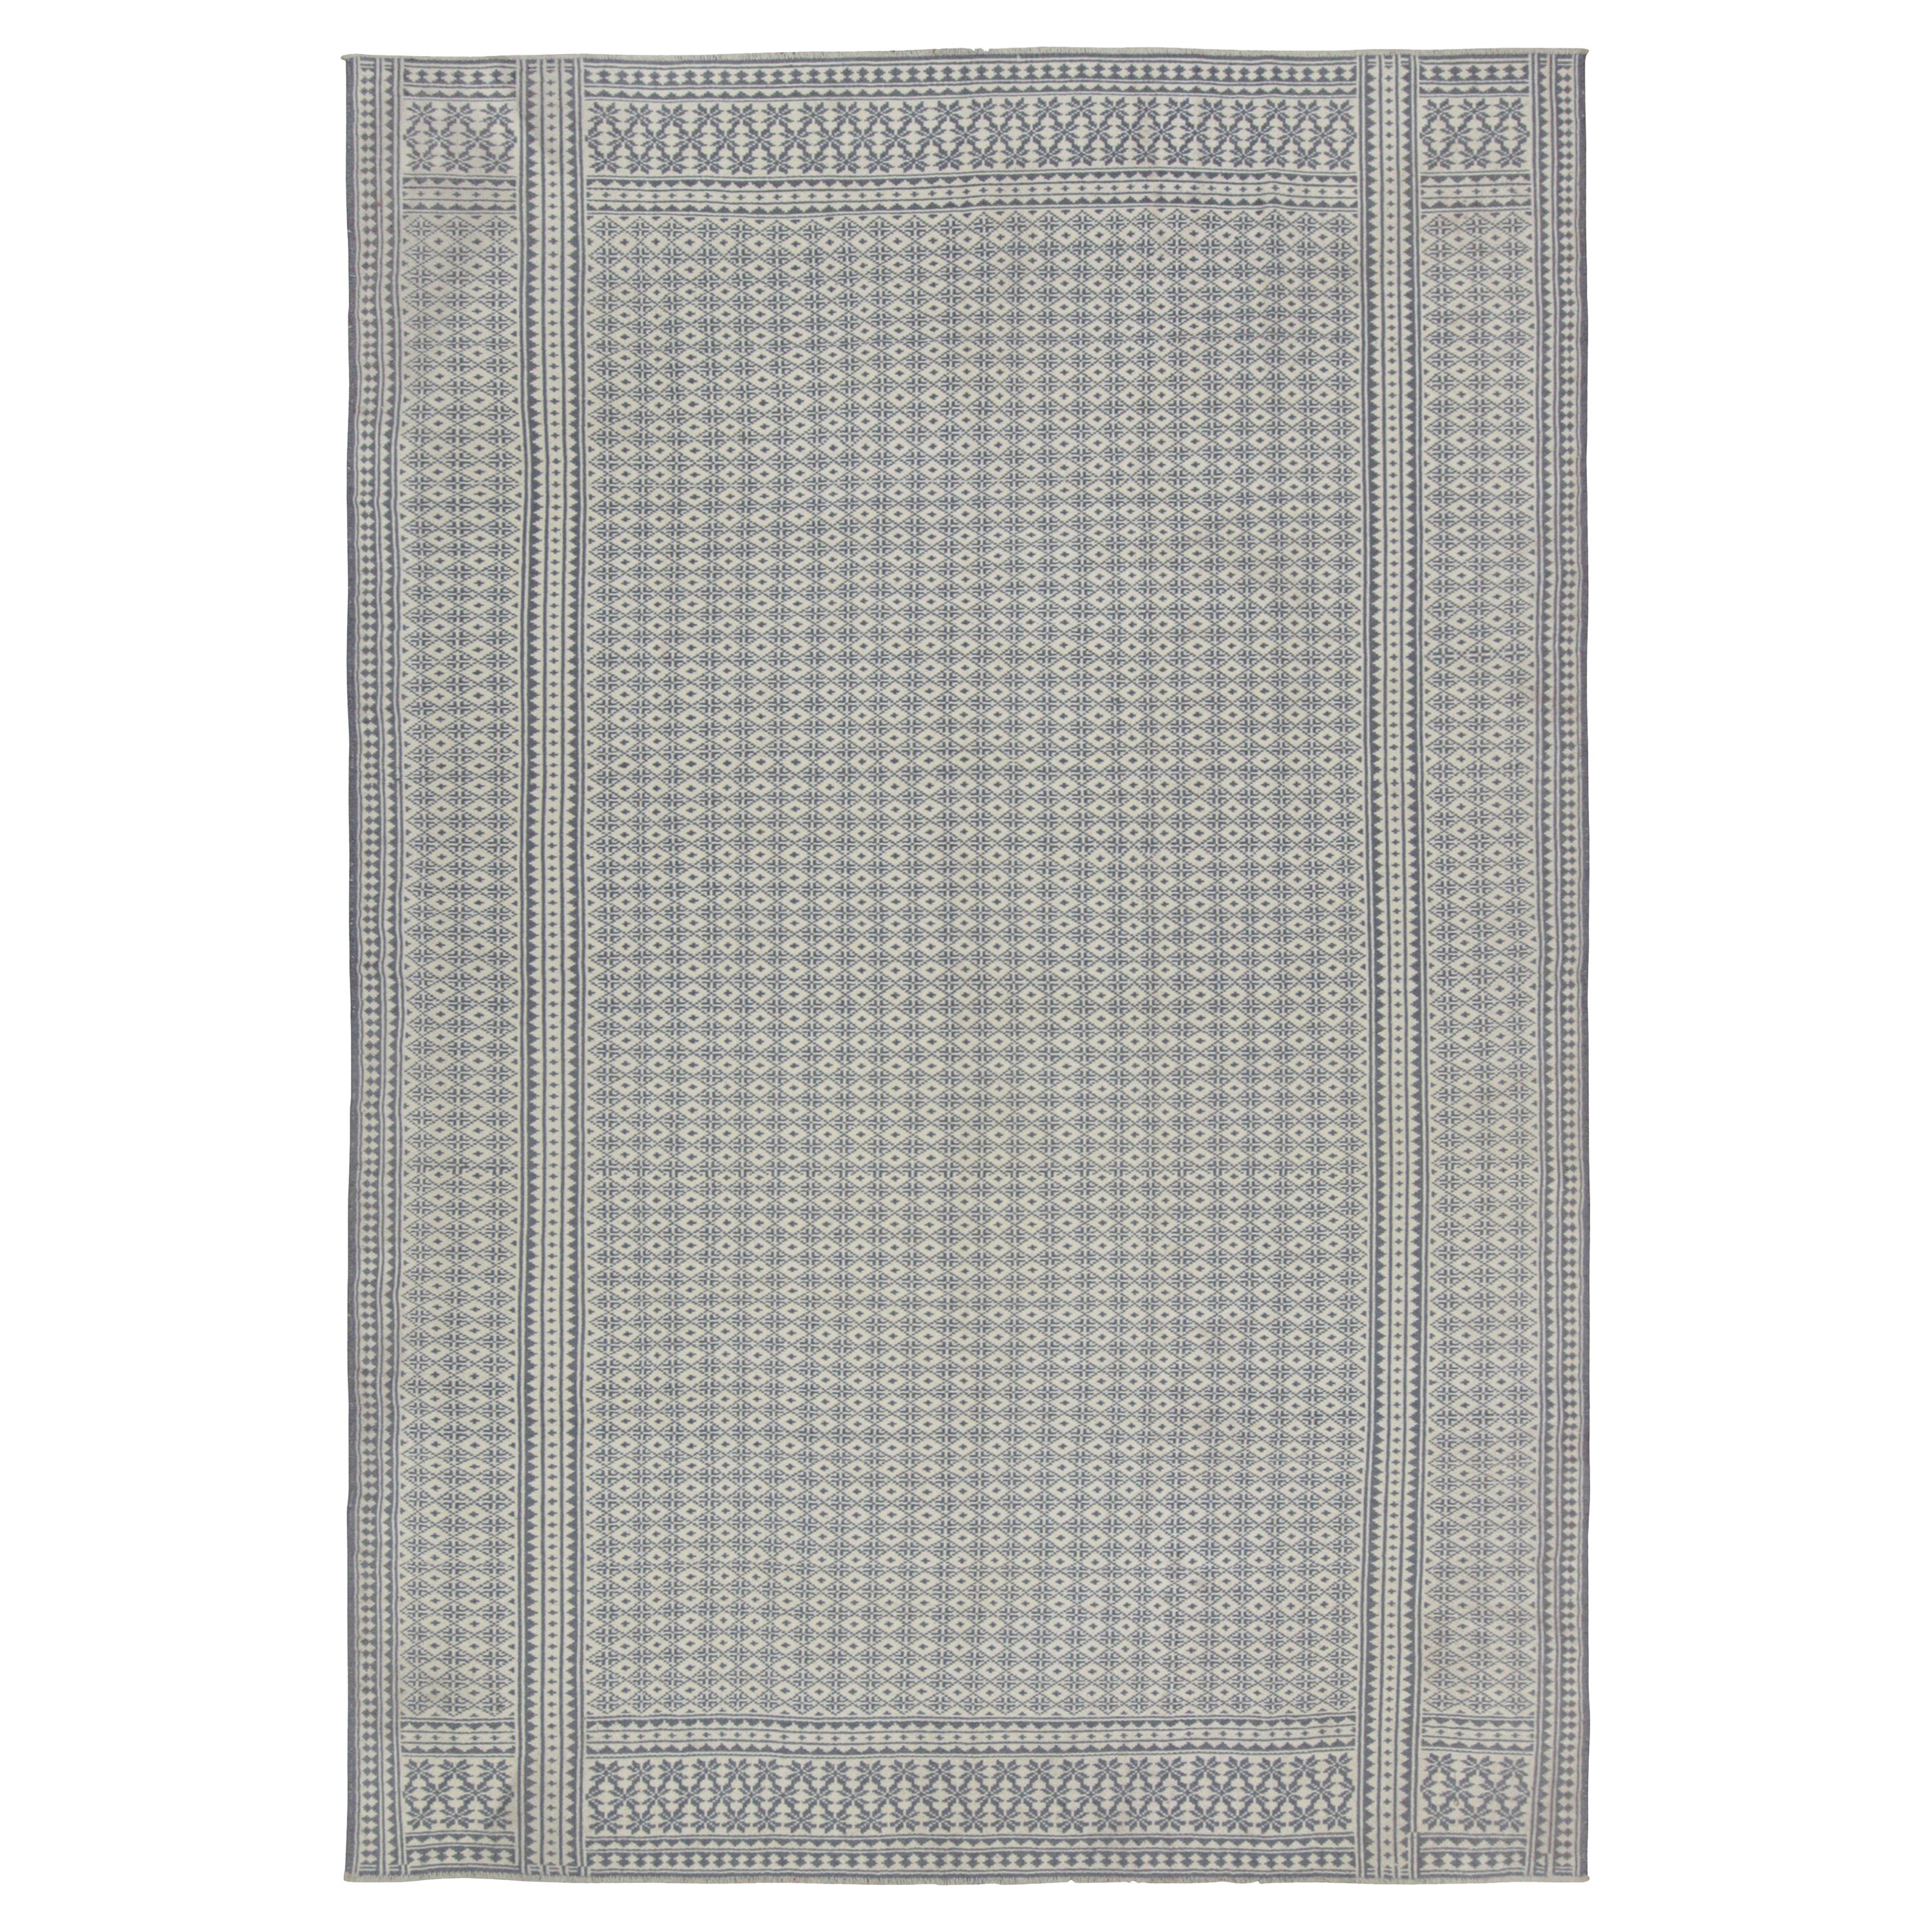 Rug & Kilim’s Zilu Style Kilim in White and Blue-Gray Geometric Pattern  For Sale